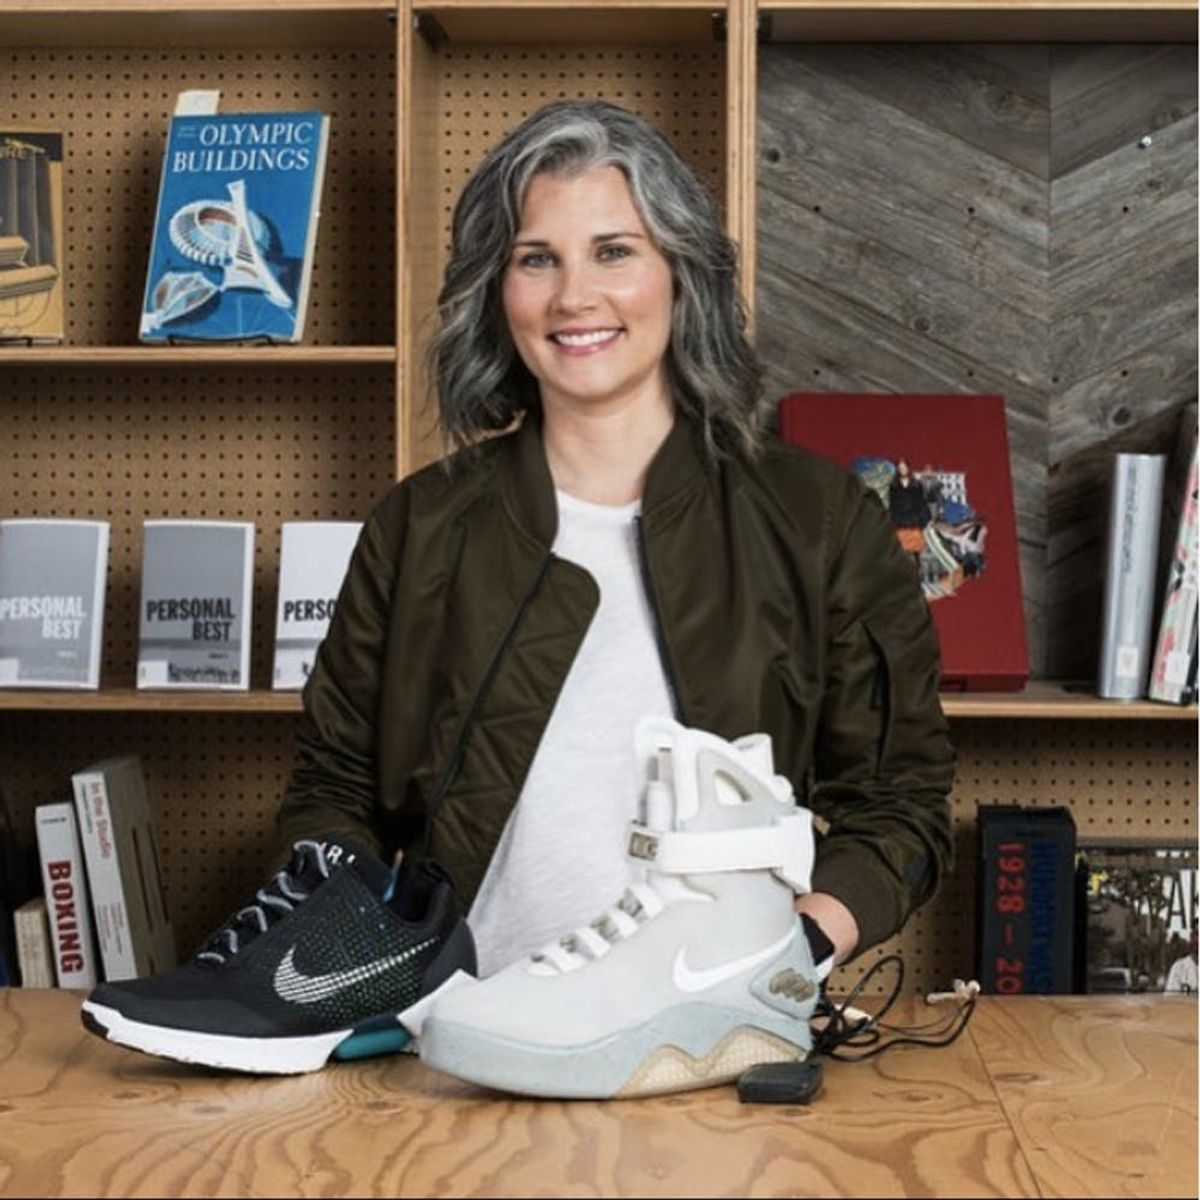 This Nike Engineer Hopes Her Marty McFly Sneaker Will Break Down Accessibility Barriers